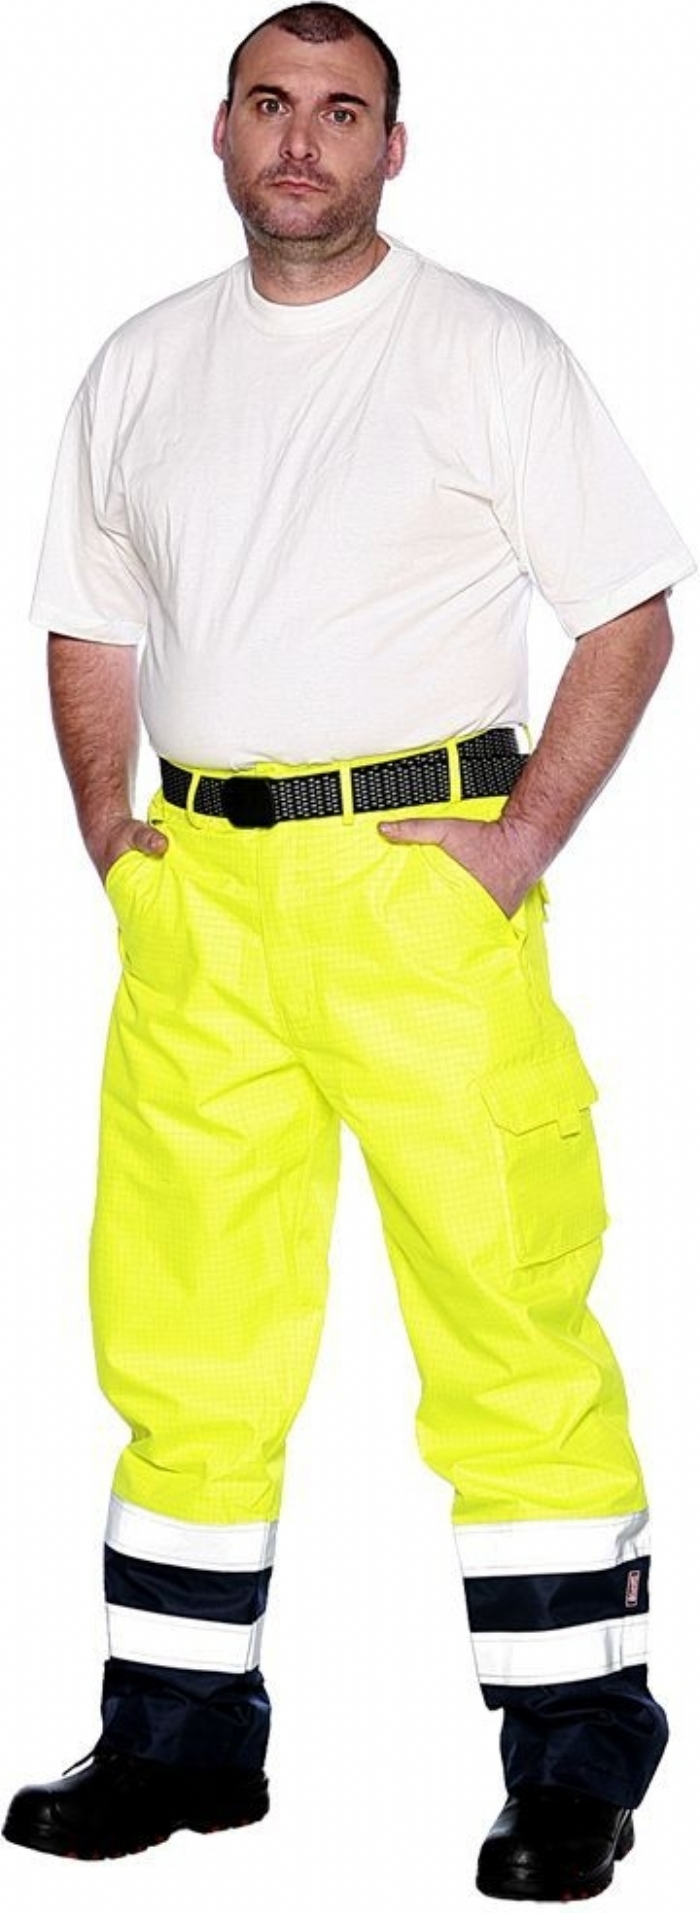 Roots Full Option Waterproof Trousers - Yellow/Navy